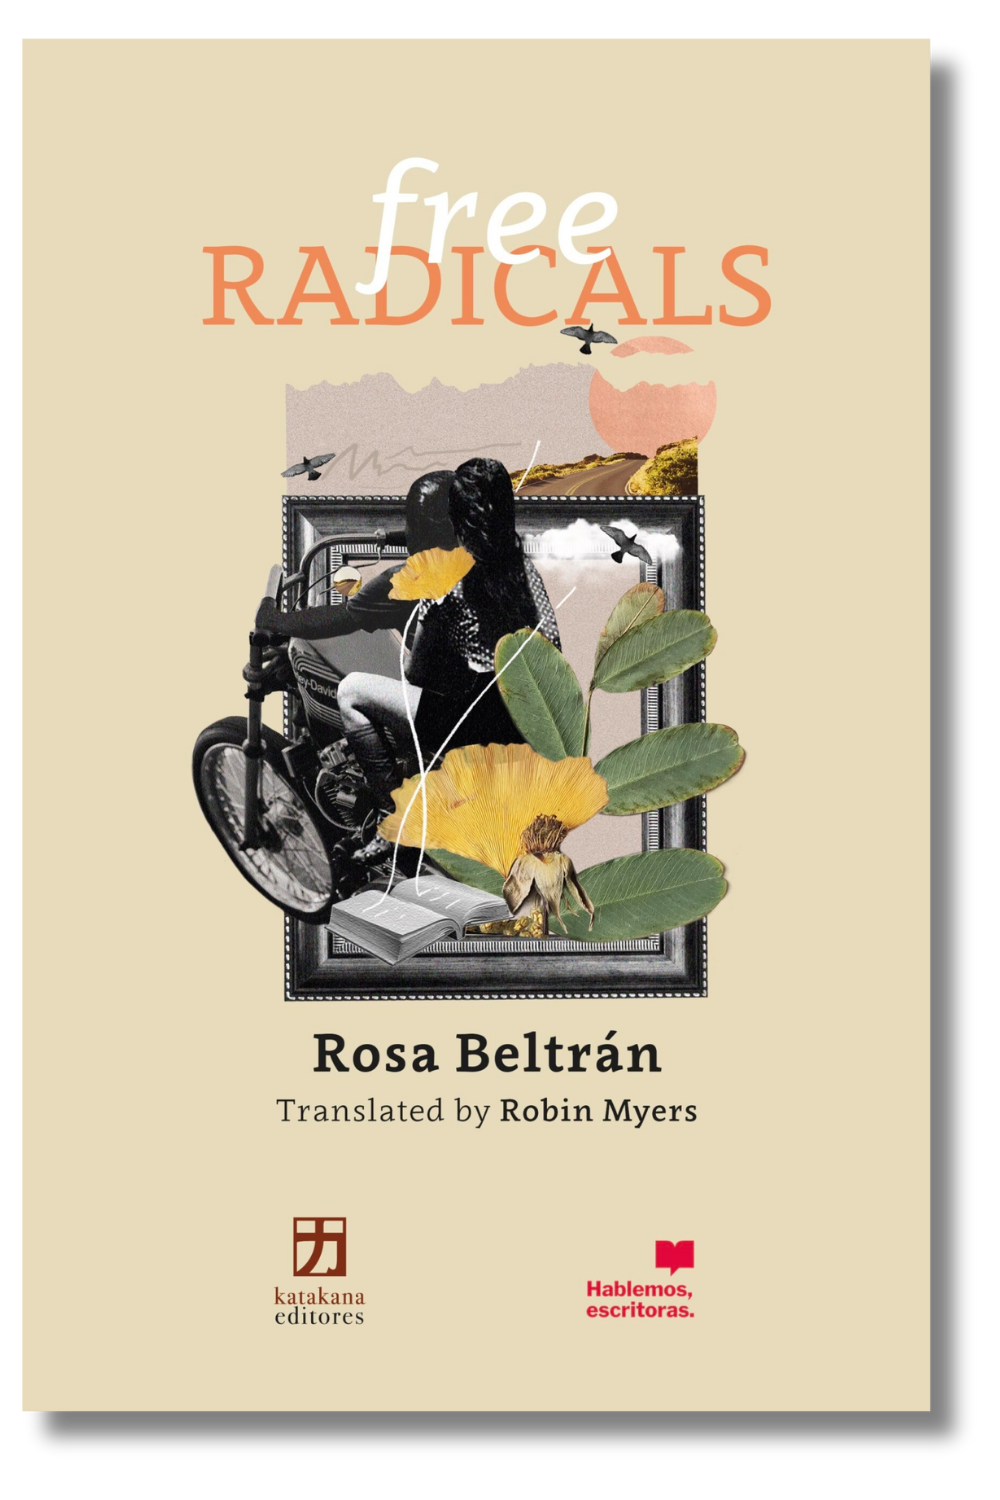 The cover of "Free Radicals" by Rosa Beltrán, translated by Robin Myers